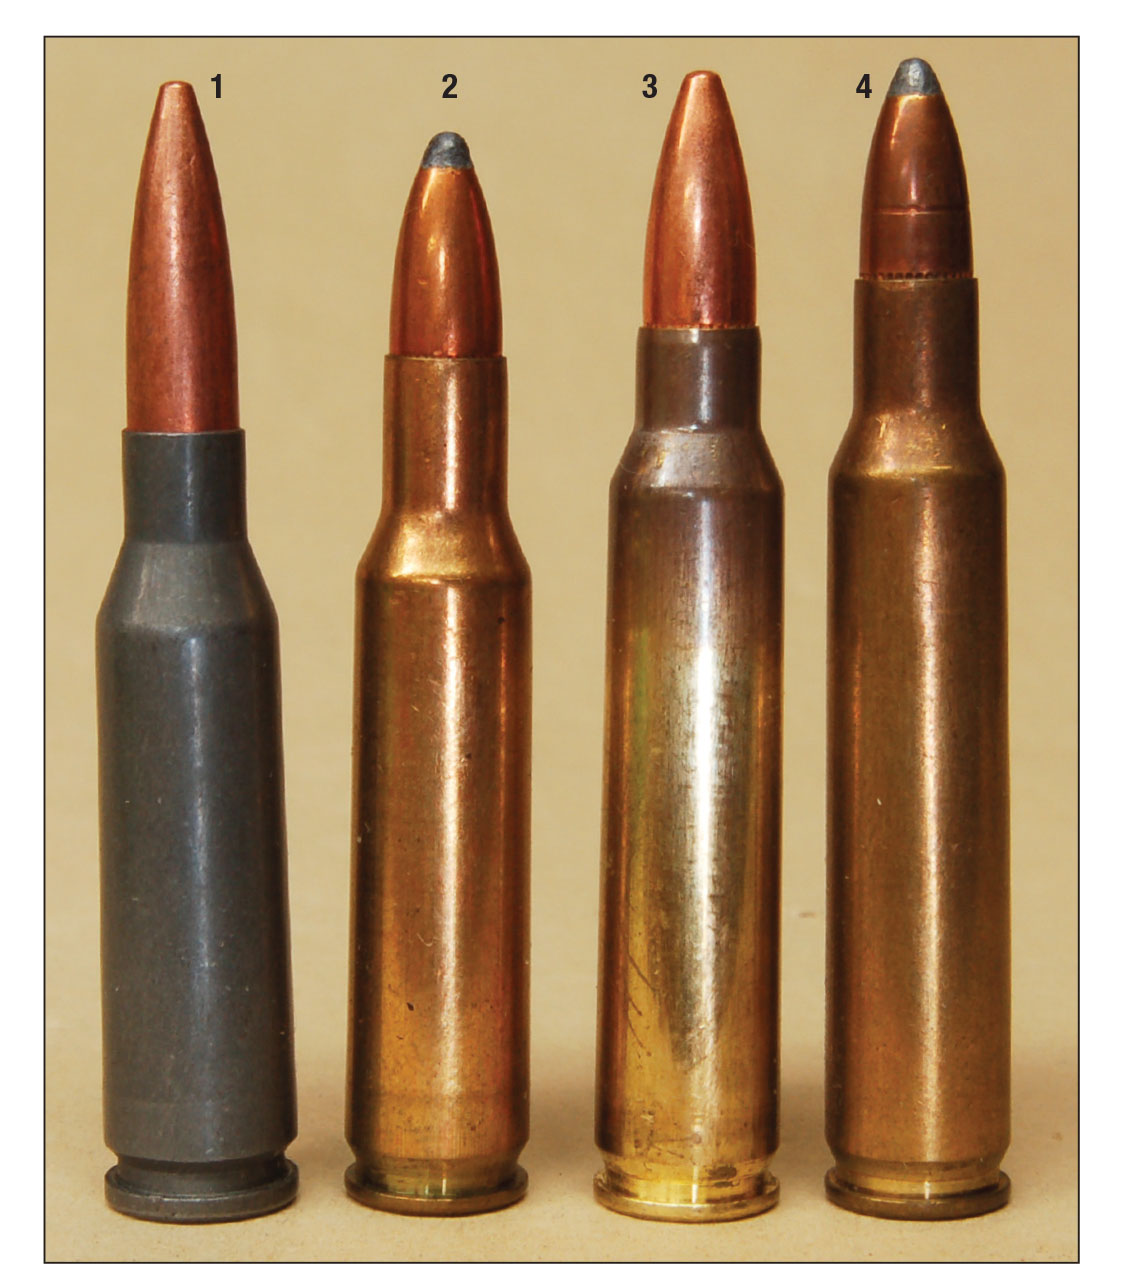 The (1) Russian 5.45x39mm is really not new. Similar rounds are (2) .222 Remington, (3) .223 Remington or 5.56 NATO and (4) .222 Remington Magnum.